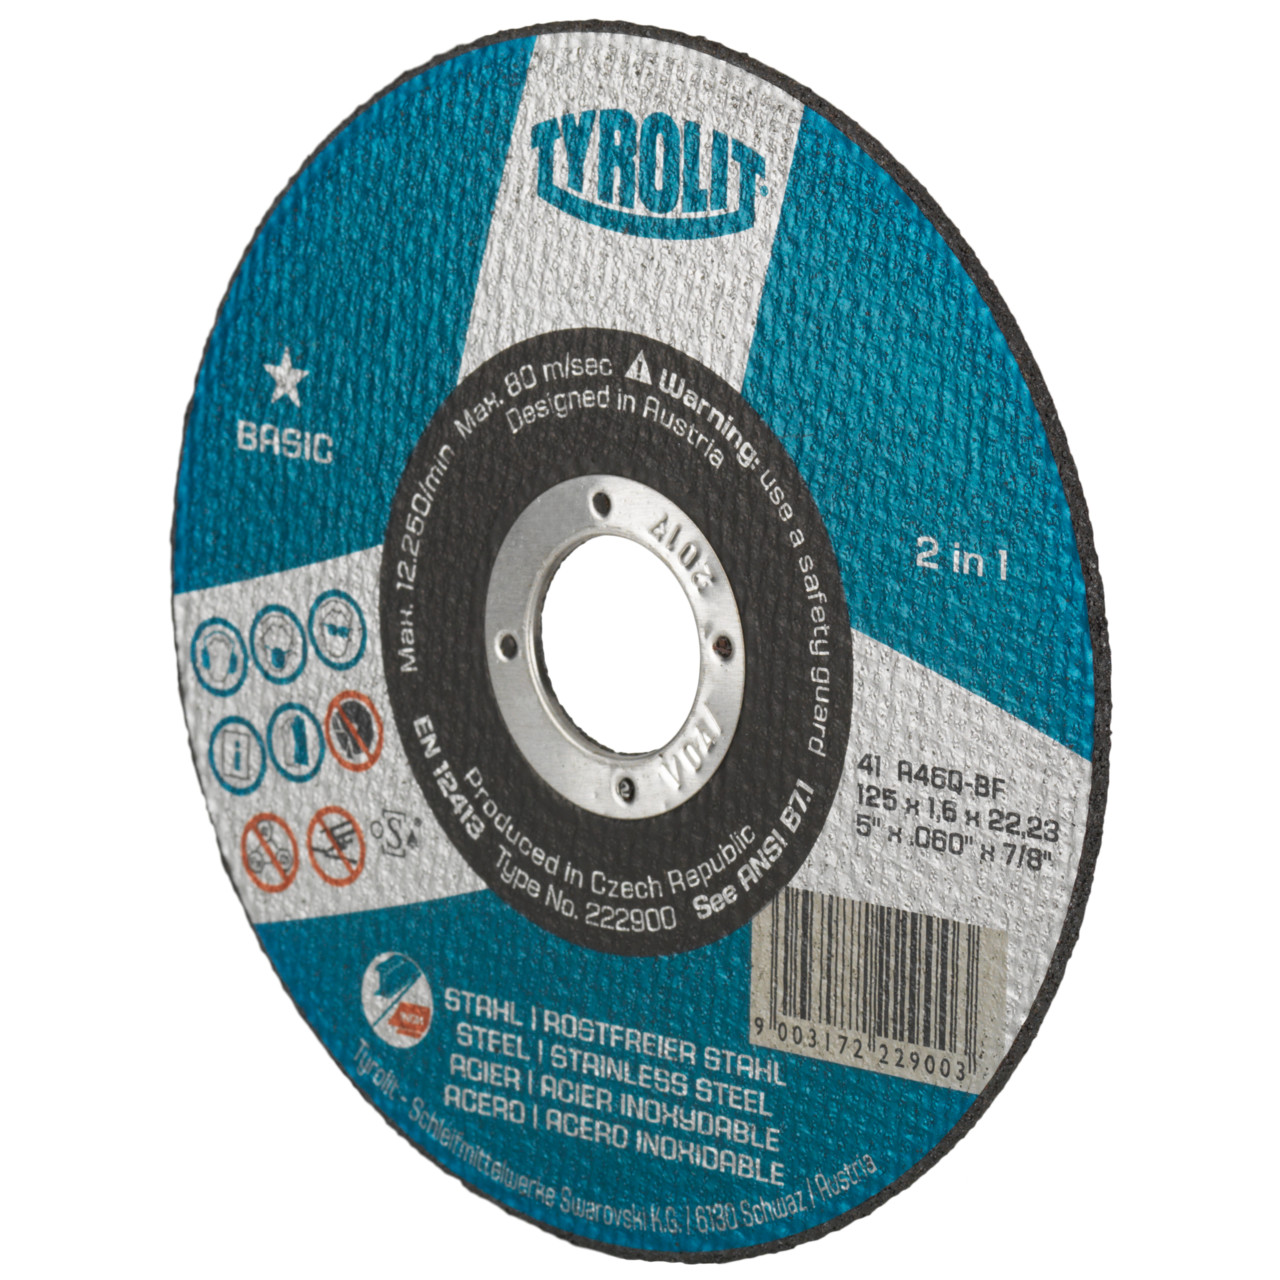 Tyrolit Cutting discs DxDxH 230x3.0x22.23 2in1 for steel and stainless steel, shape: 41 - straight version, Art. 223002